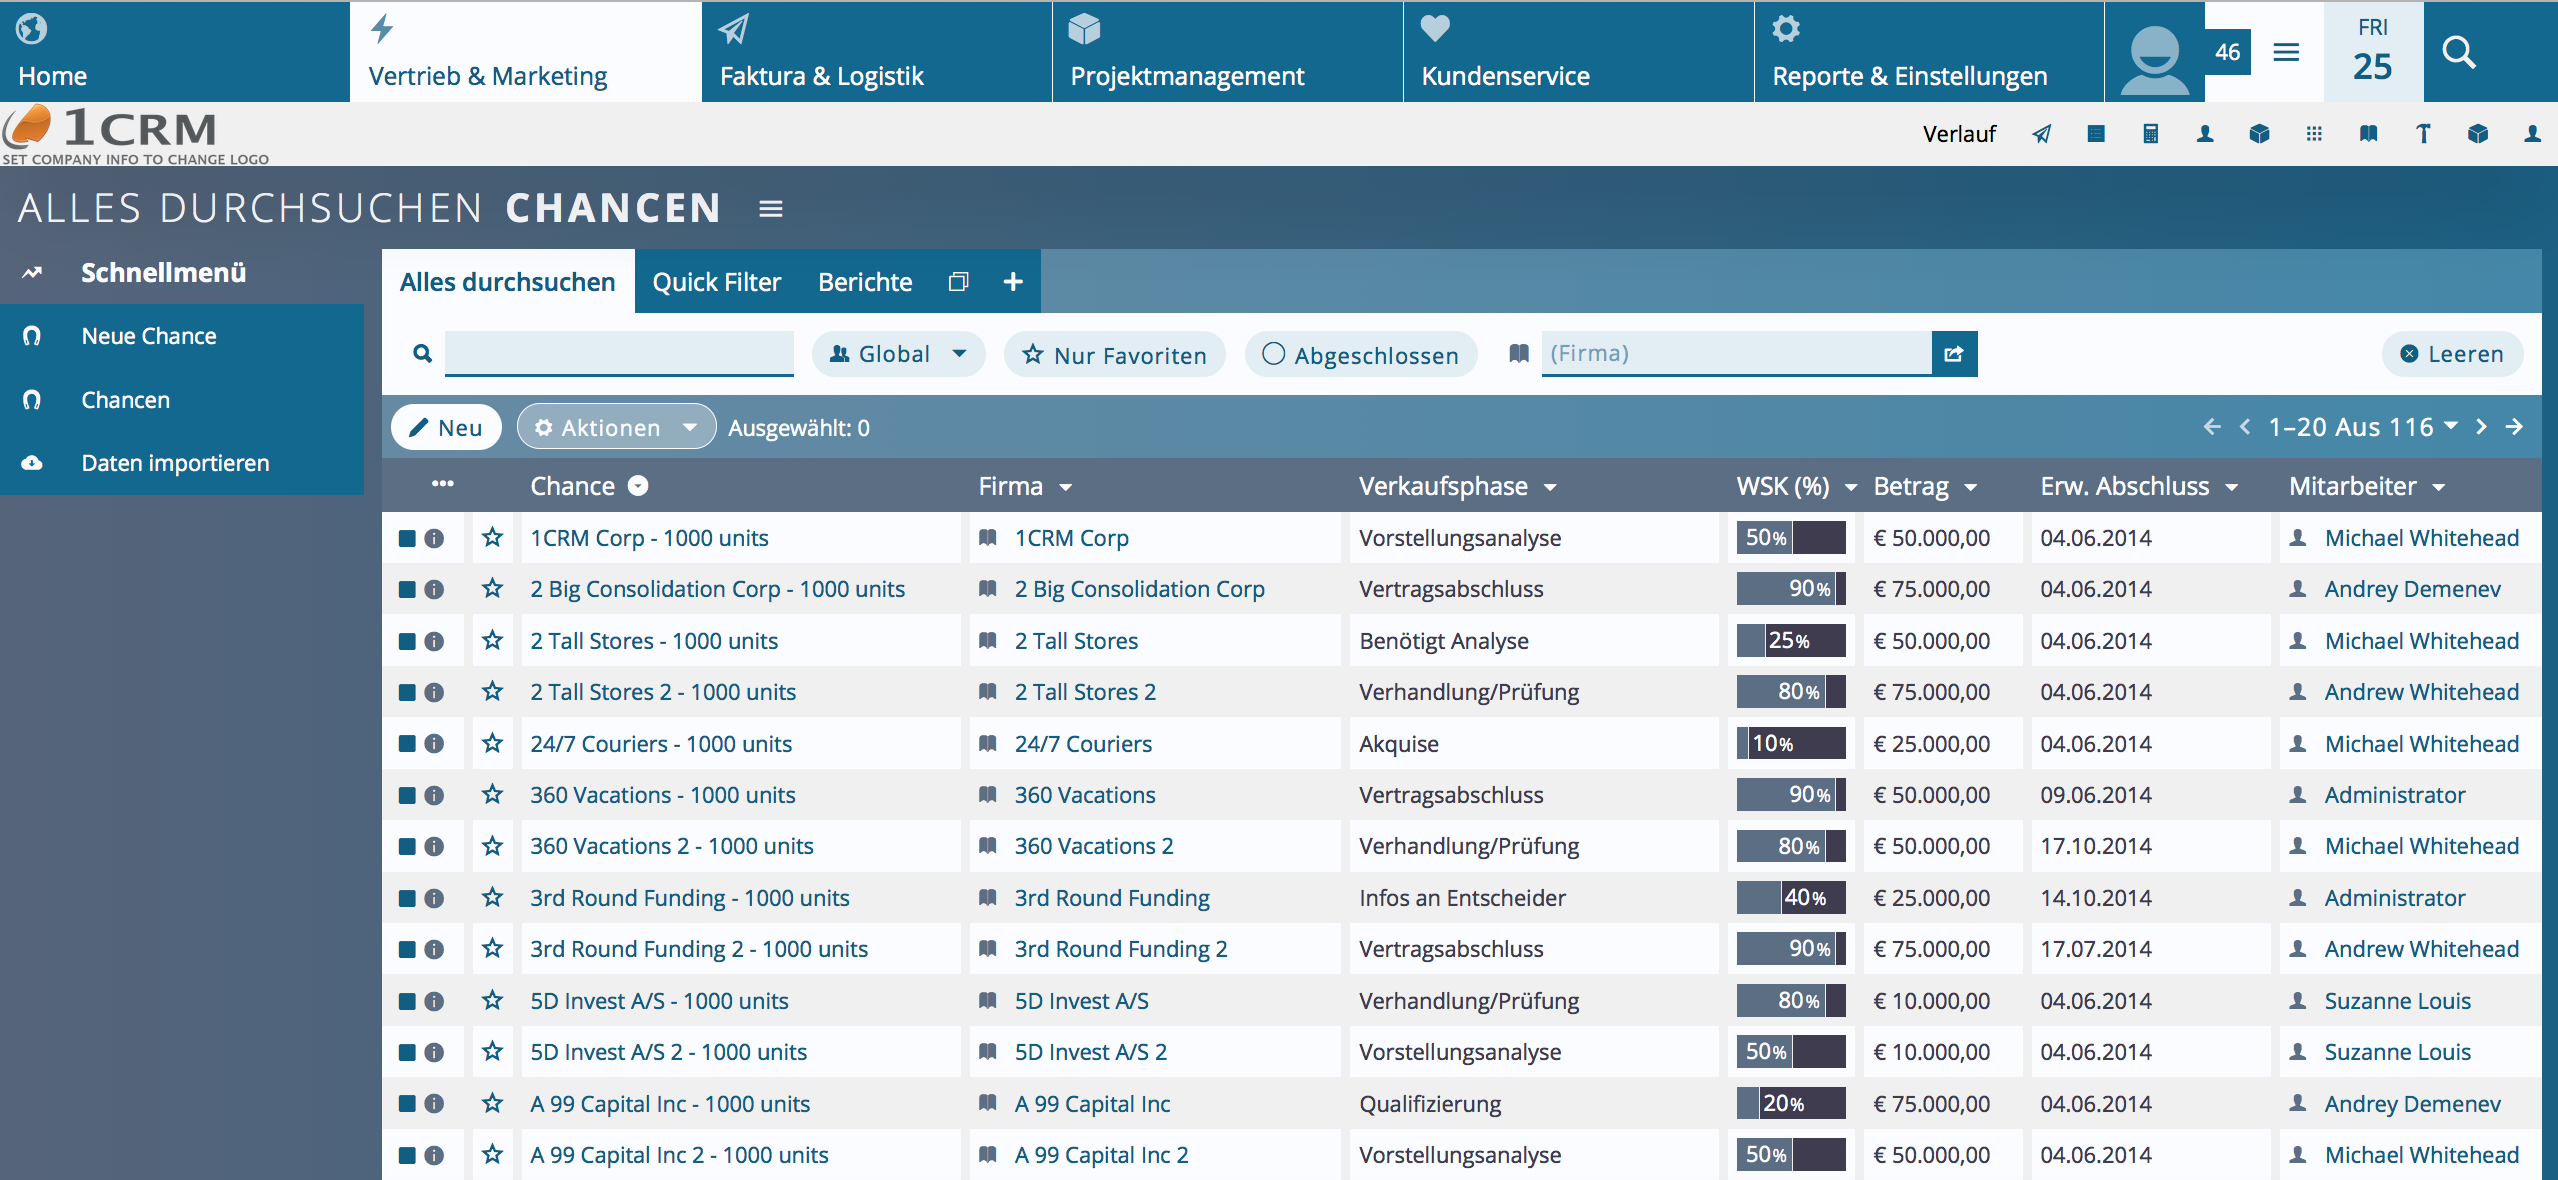 1CRM Analysis, Reviews, Pricing, Features CRM Directory